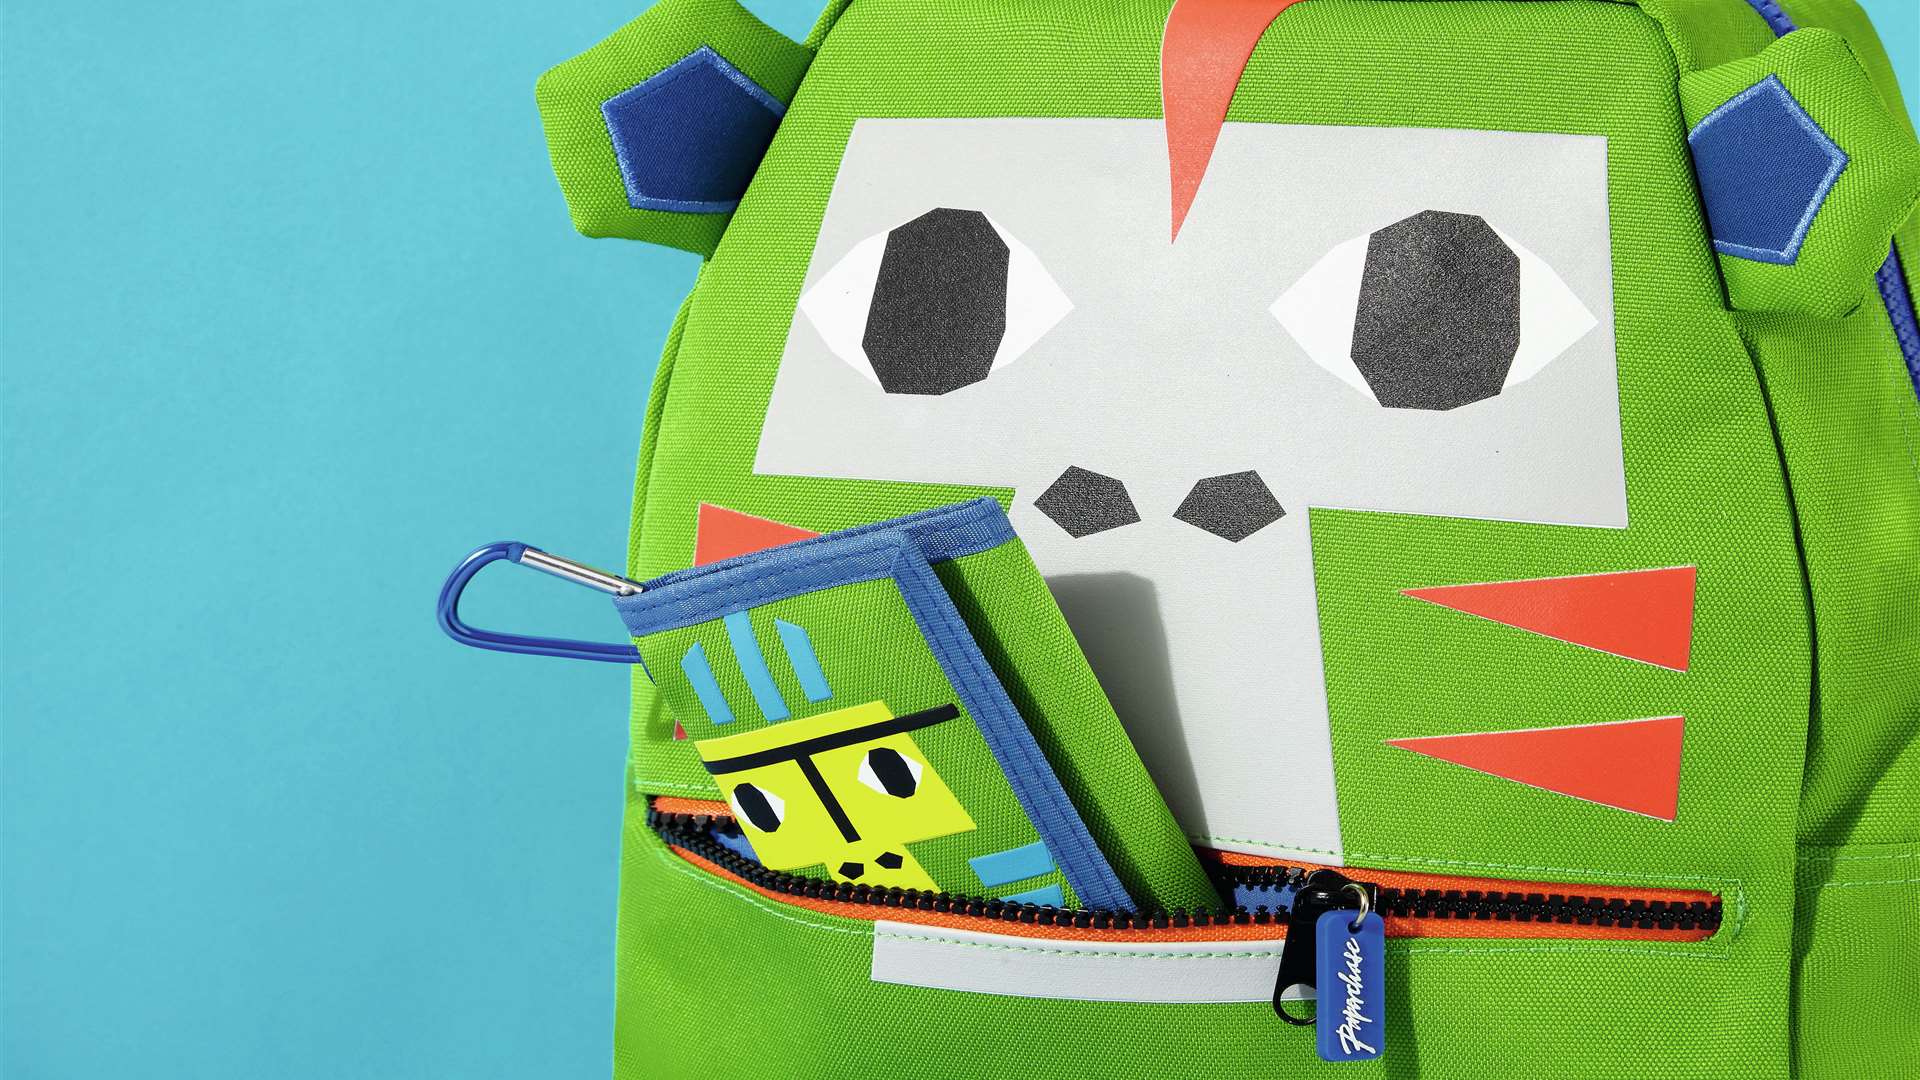 Have a monster time at school with this backpack